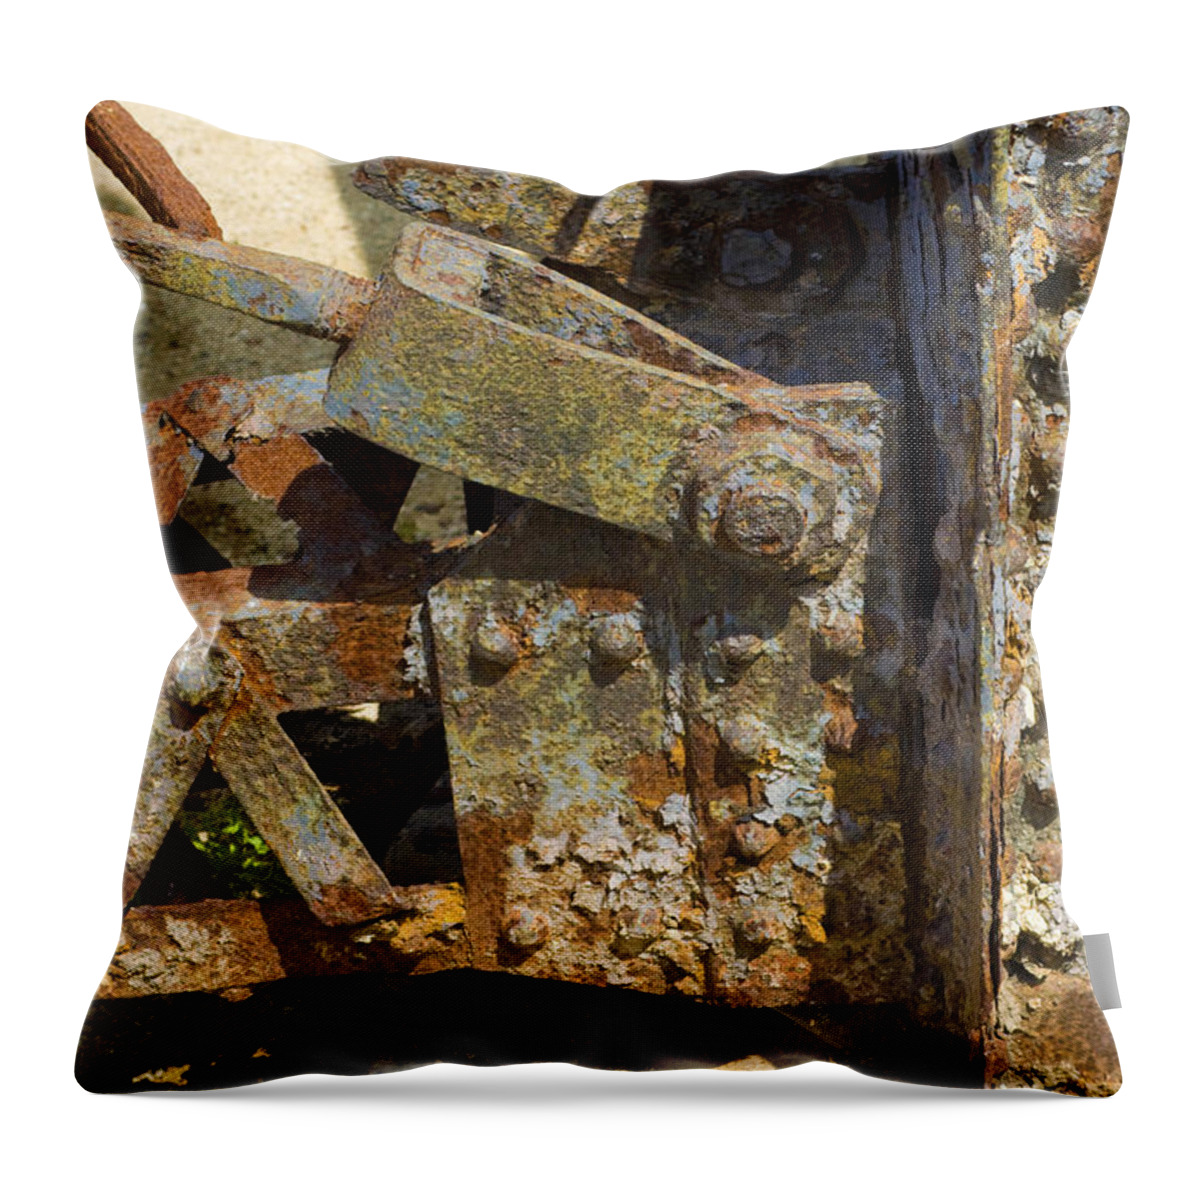 Rusty Throw Pillow featuring the photograph Corroded Steel by Lynn Hansen